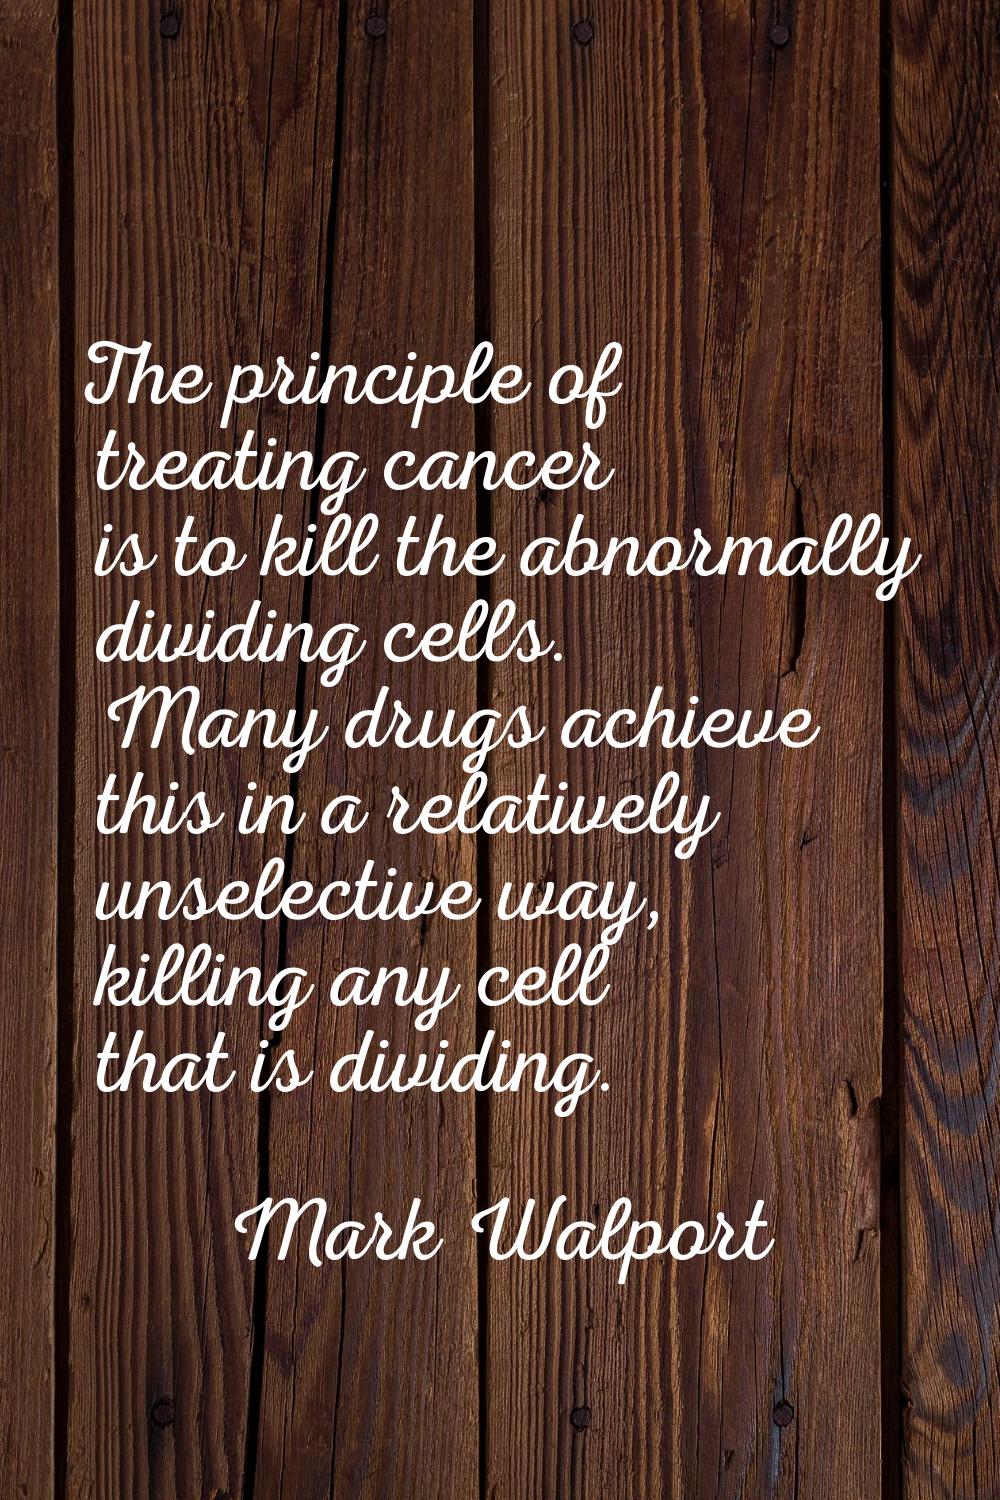 The principle of treating cancer is to kill the abnormally dividing cells. Many drugs achieve this 